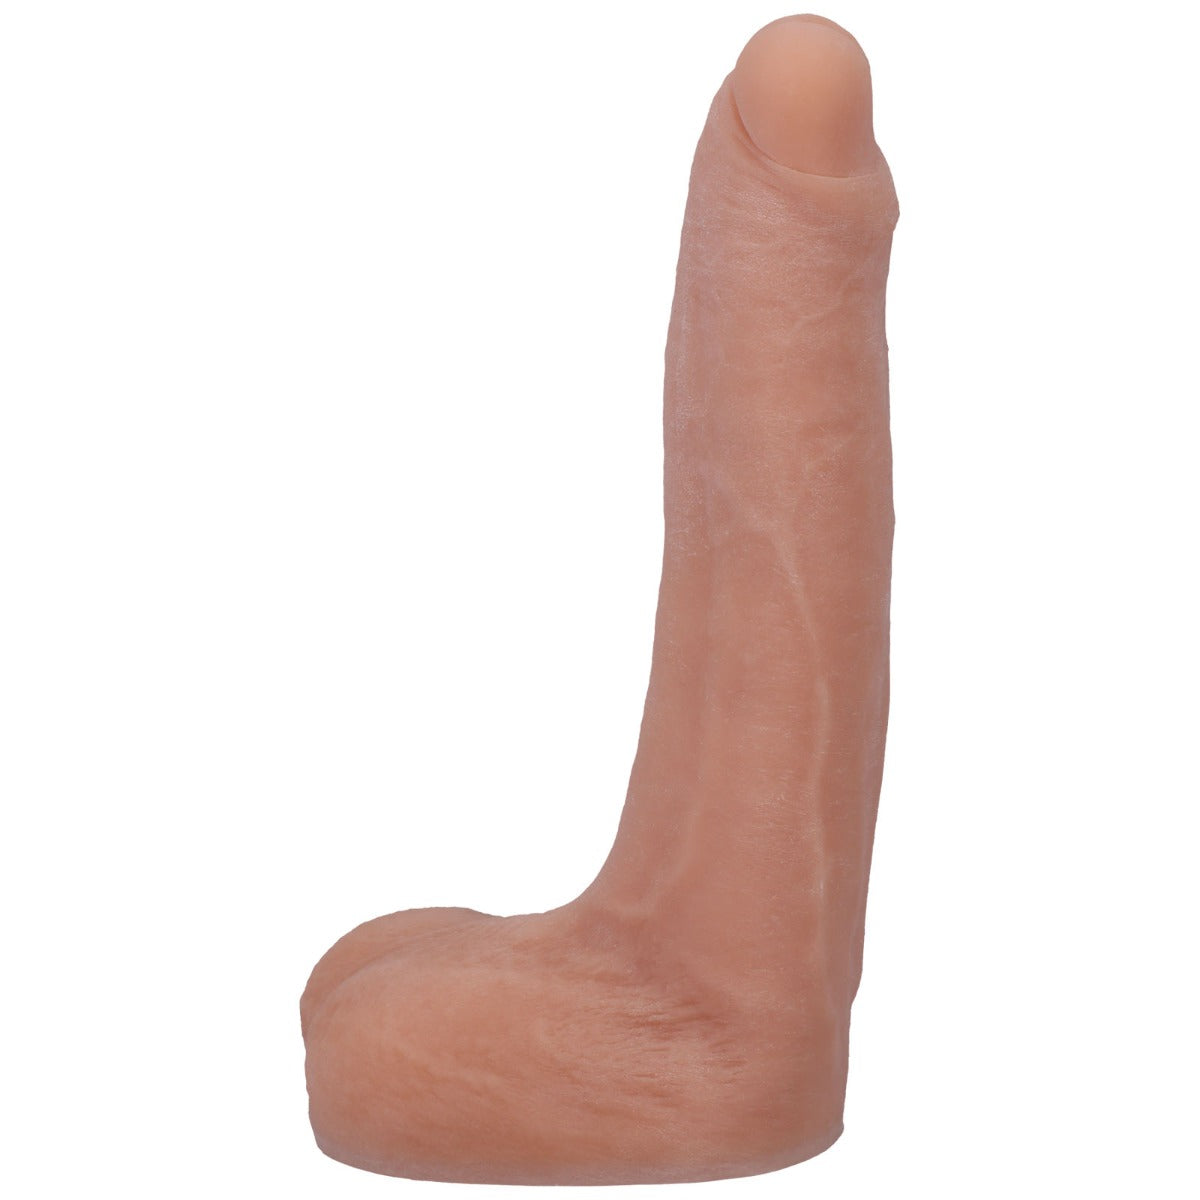 Suction Base Dildos Signature Cocks Owen Gray Ultraskyn Dildo with Removable Vac-U-Lock Suction Cup 8 Inch   